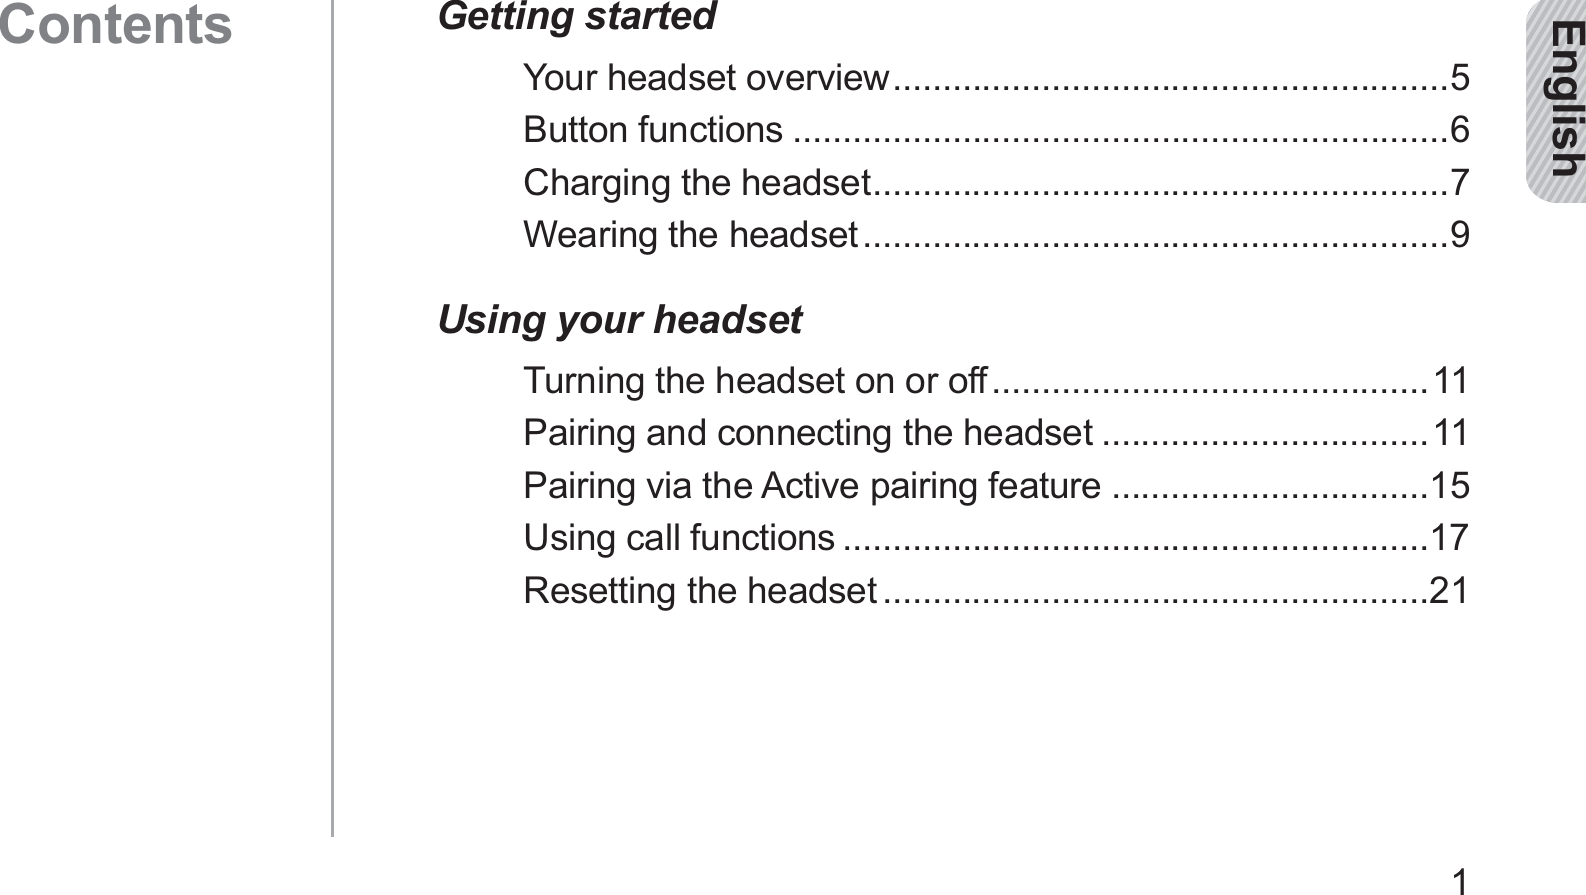 English1EnglishGetting startedYour headset overview ........................................................5Button functions ..................................................................6Charging the headset ..........................................................7Wearing the headset ...........................................................9Using your headsetTurning the headset on or off ............................................11Pairing and connecting the headset .................................11Pairing via the Active pairing feature ................................15Using call functions ...........................................................17Resetting the headset .......................................................21Contents